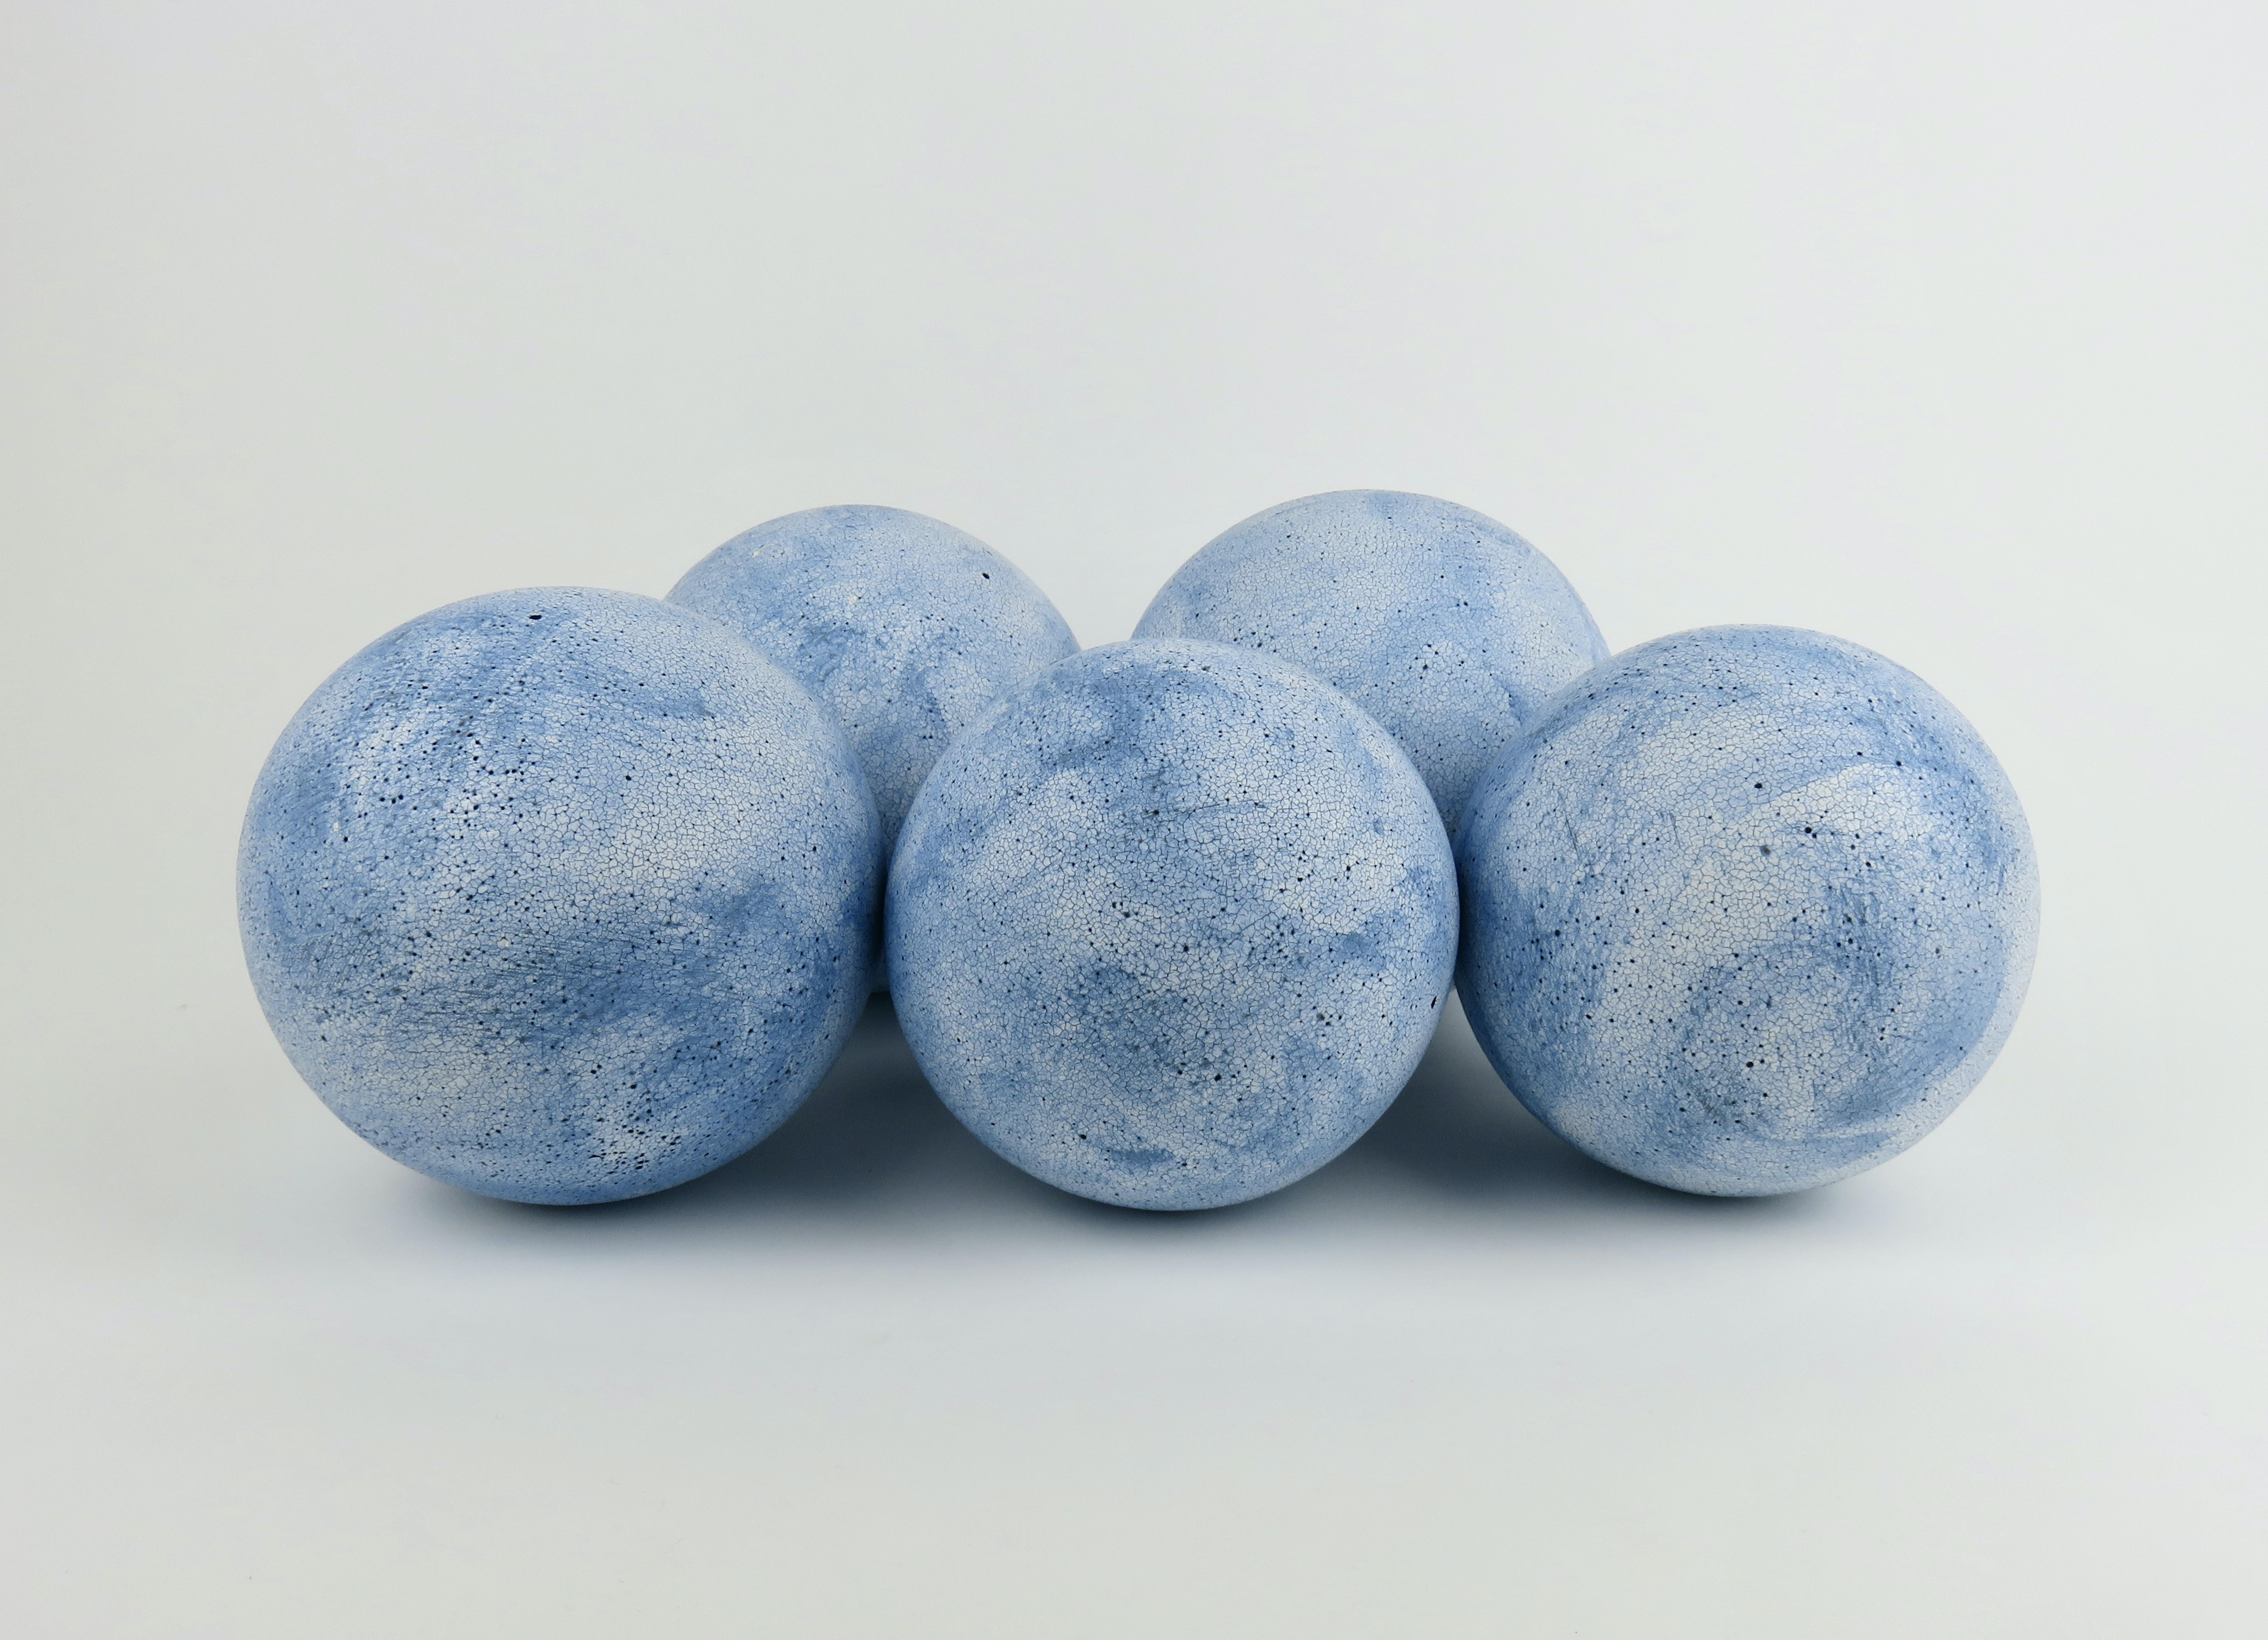 Five sky blue spheres, hand built in white ceramic stoneware. First formed as a solid sphere of clay, then hollowed out and re-attached. After much paddling, scraping and shaving to perfect the forms, they are allowed to dry. Once dry enough they